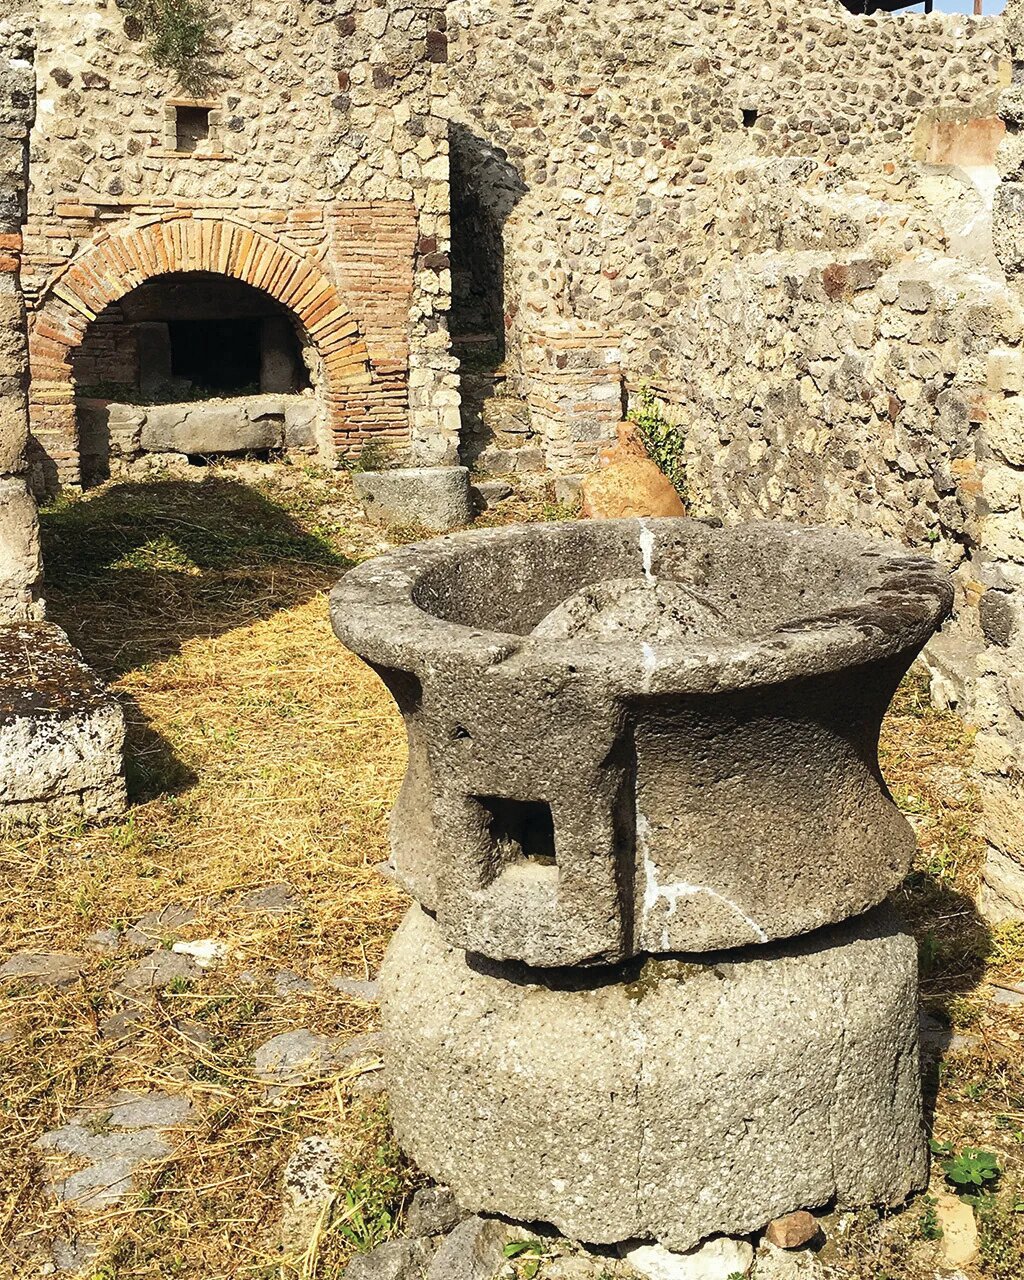 Ovens and millstones have been used around the world for thousands of years. This oven and millstone were discovered at the ancient site of Pompeii, which was covered by volcanic ash and debris in 79 A.D.